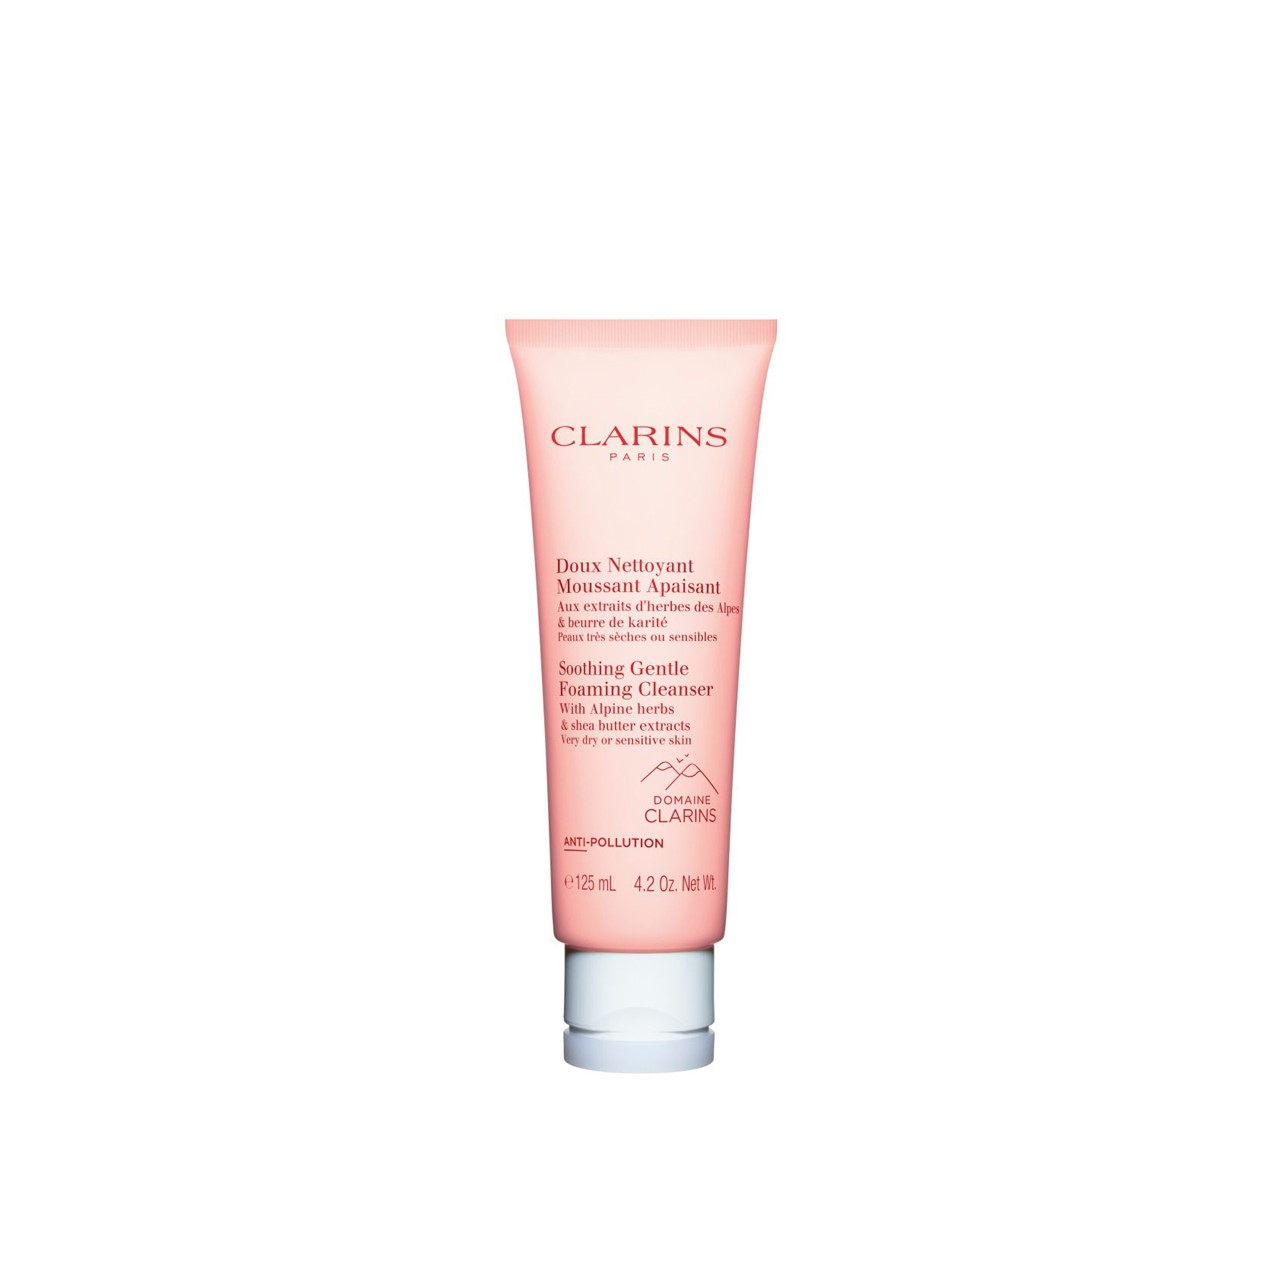 Clarins Soothing Gentle Foaming Cleanser 125ml (4.23fl oz)